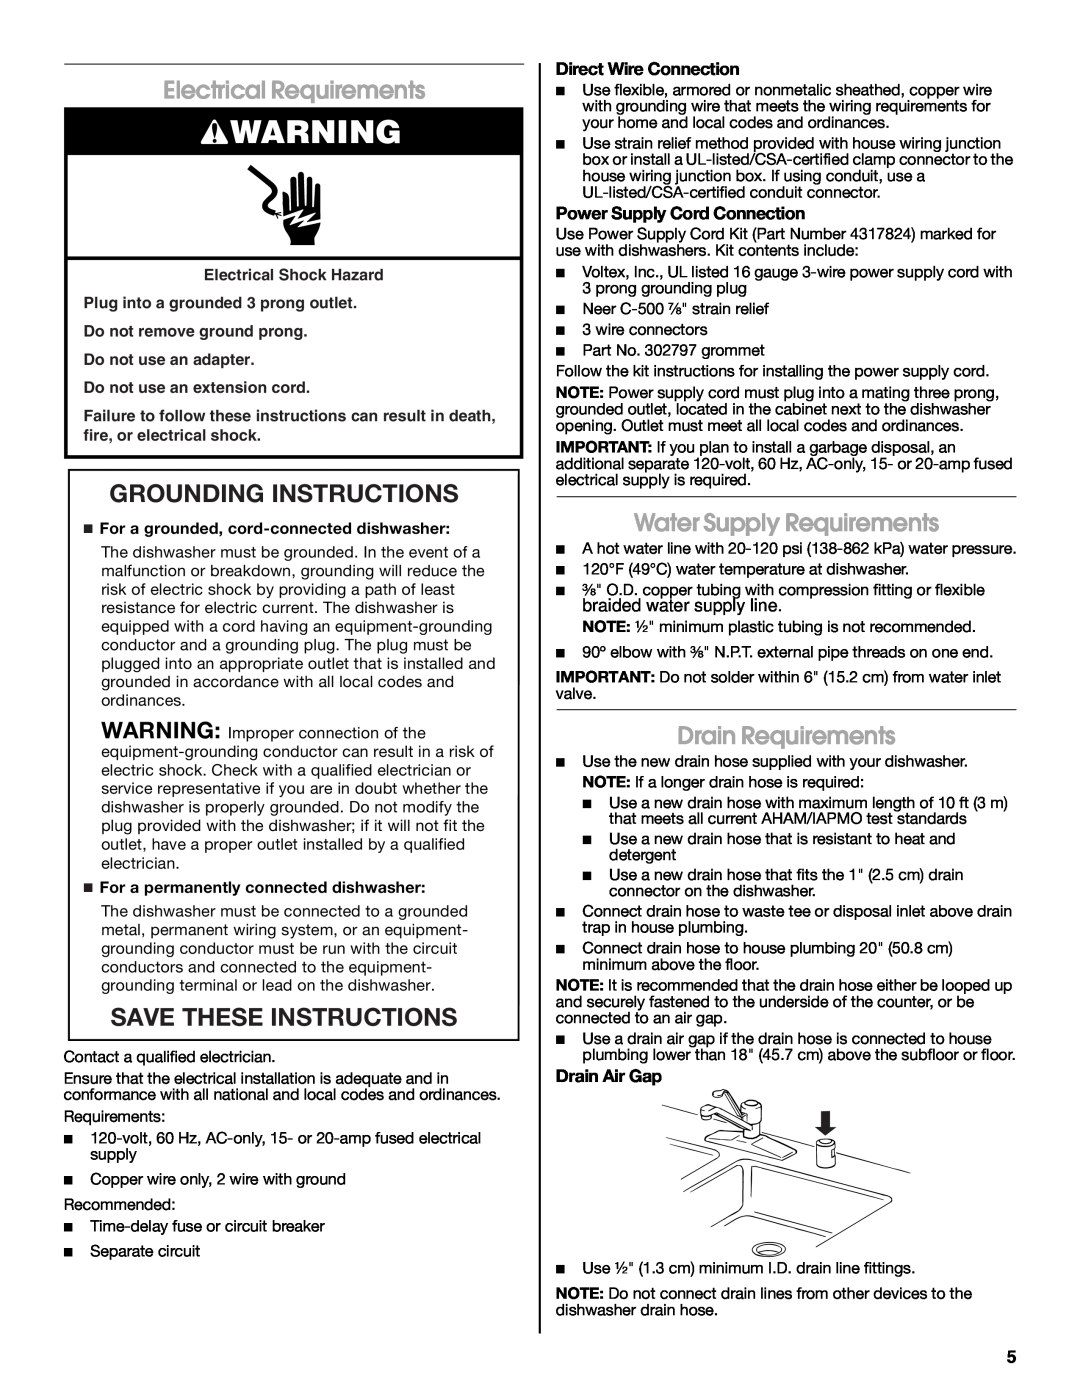 Whirlpool GU3100XTVQ Electrical Requirements, Grounding Instructions, Save These Instructions, Water Supply Requirements 